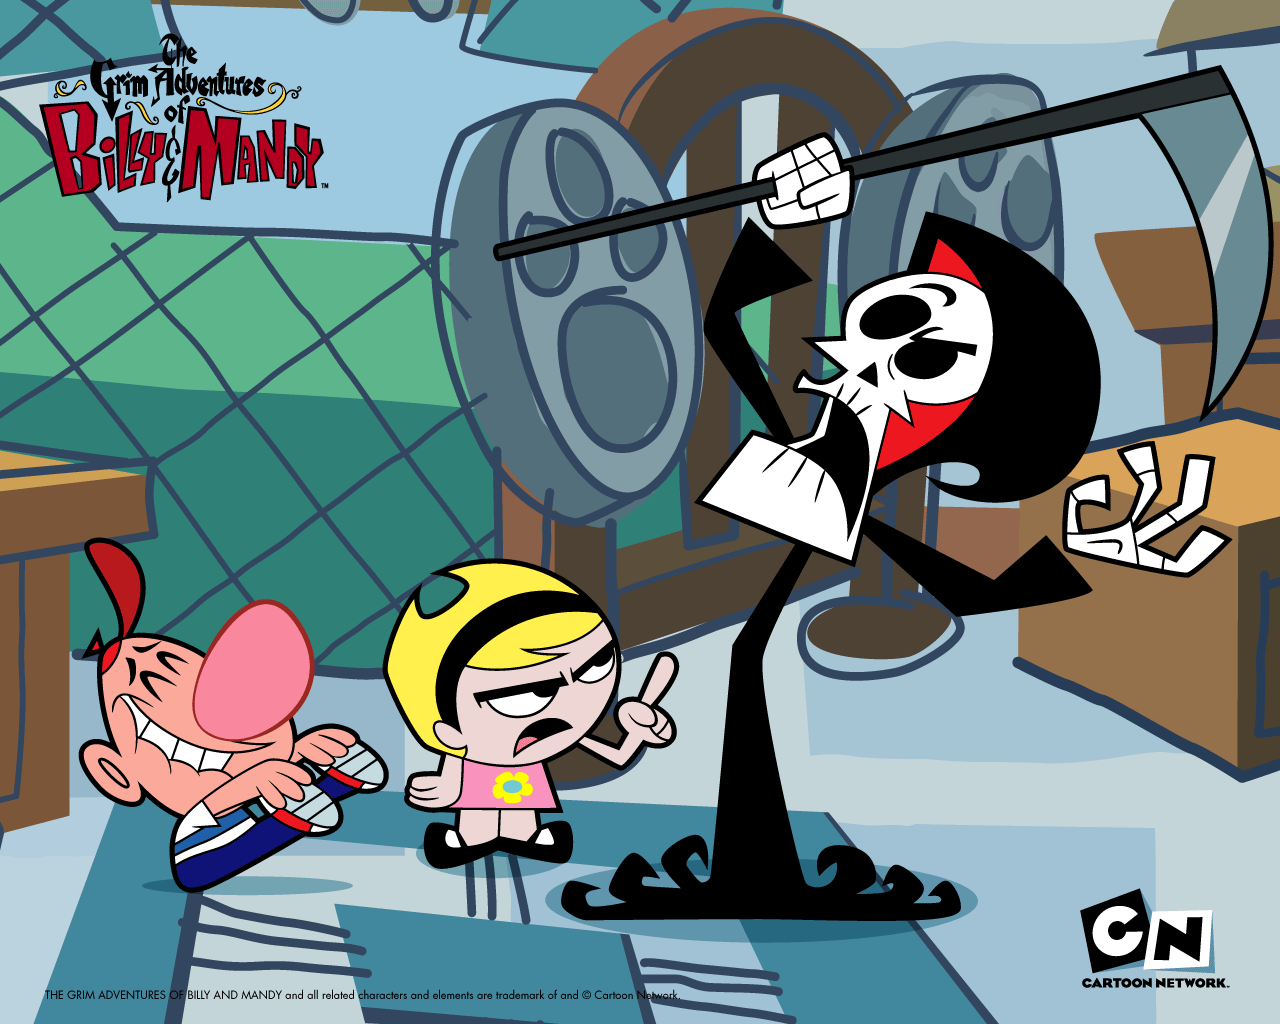 Photo: HD Quality Cartoon Network Wallpapers, by Reatha Easterly